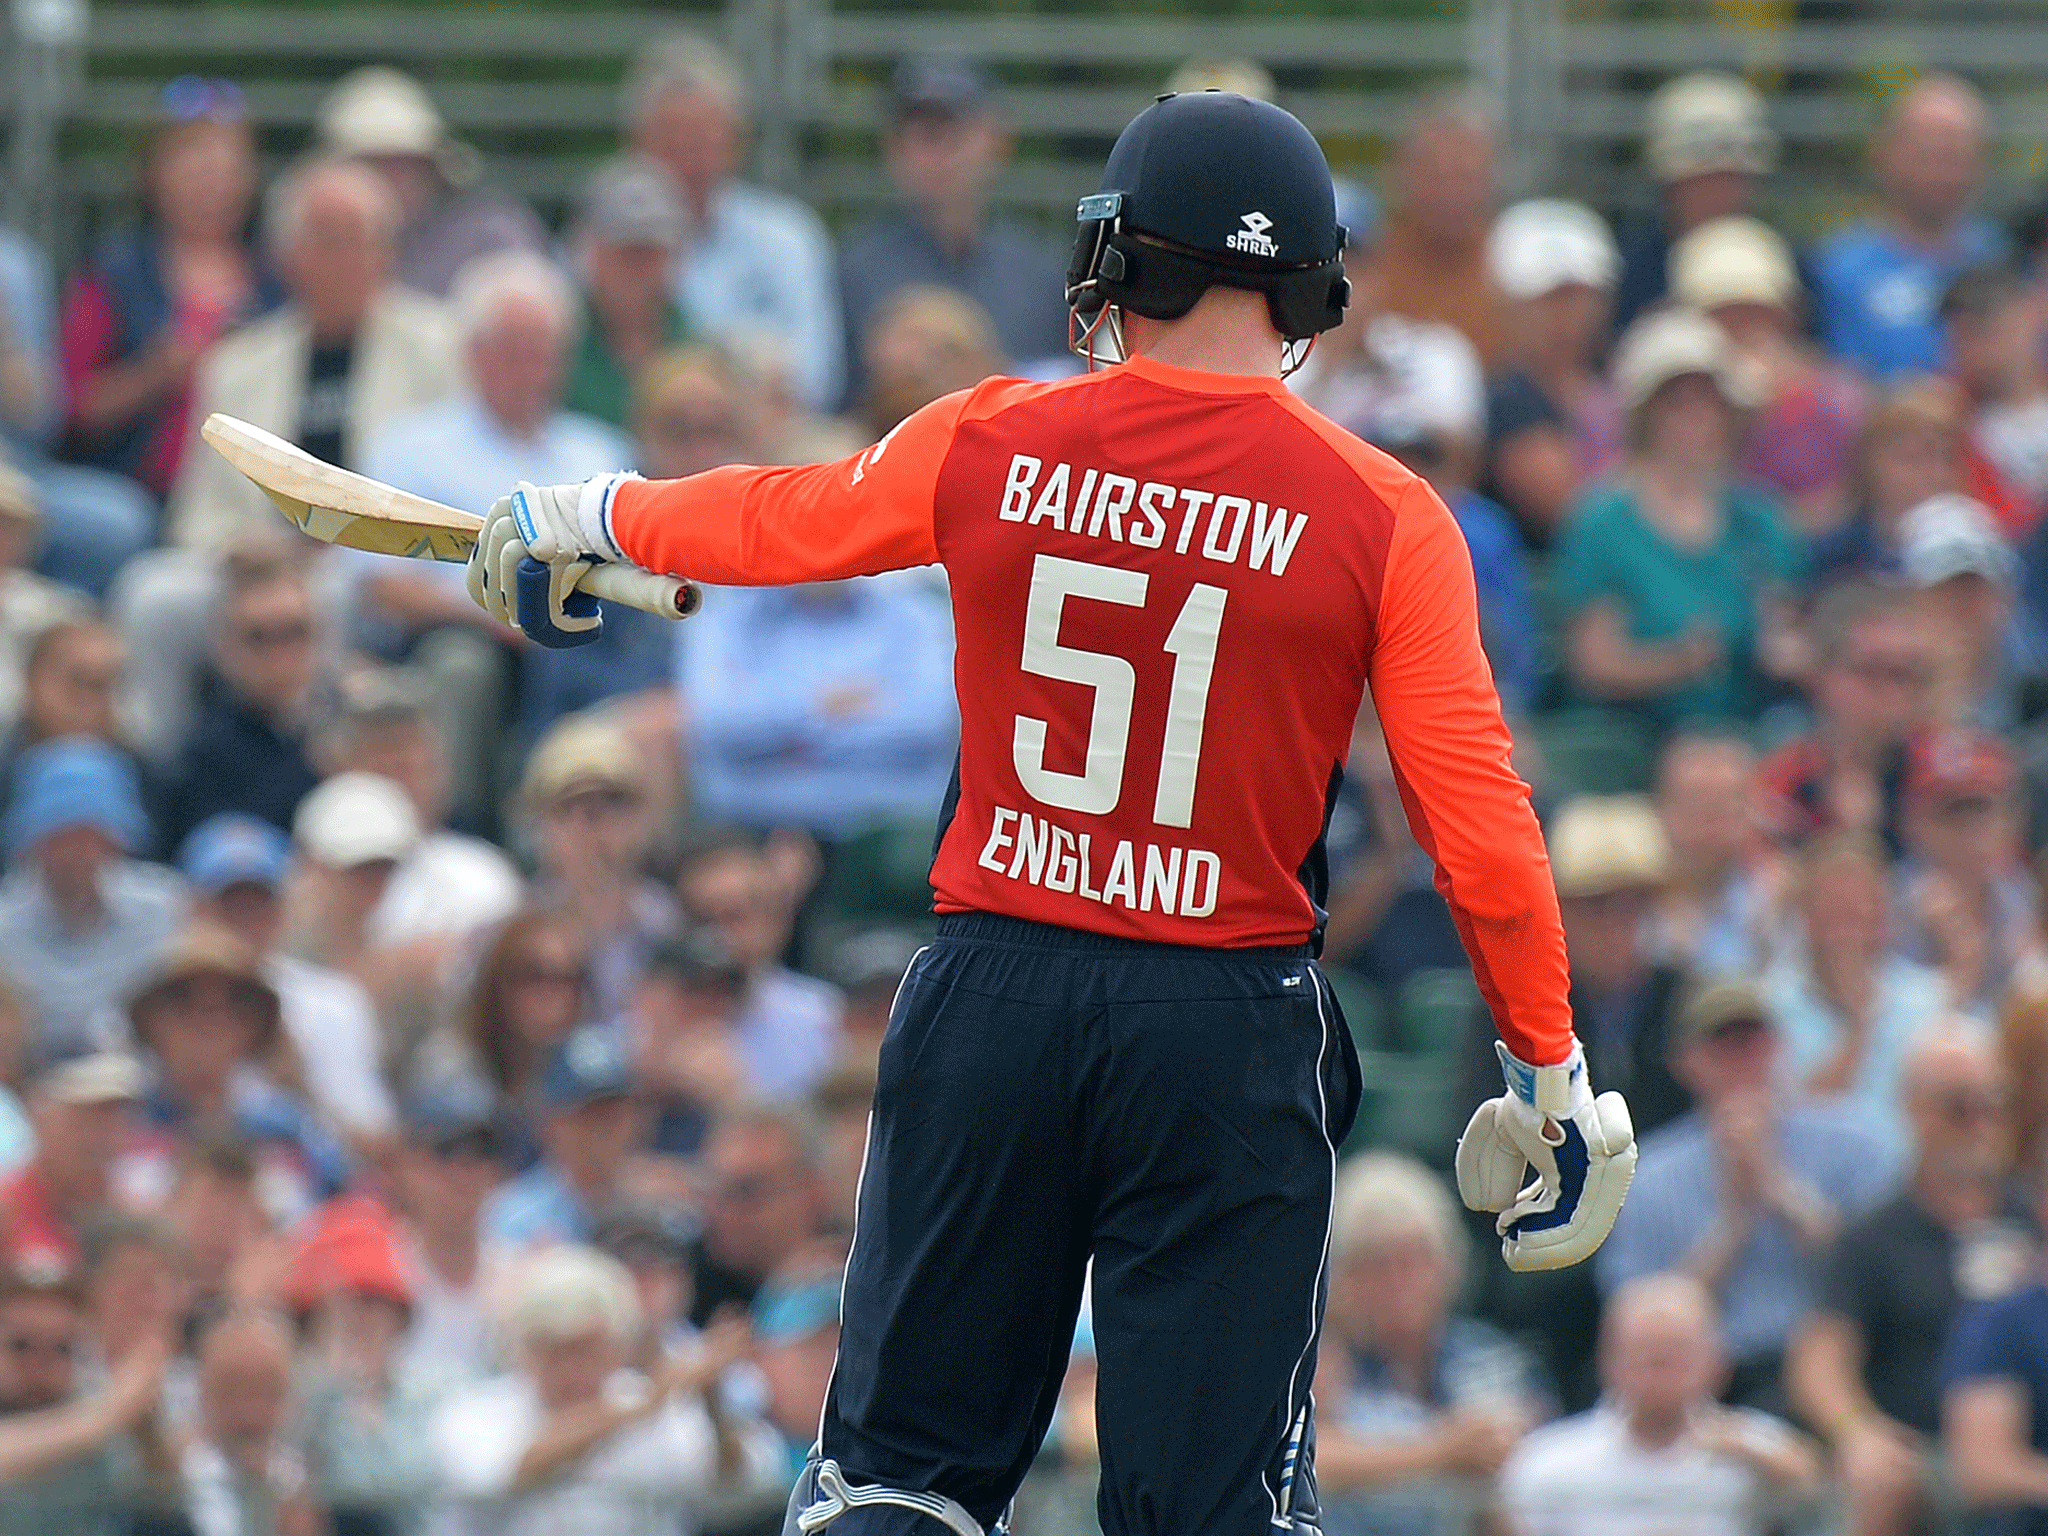 It is less than a year since Bairstow was on the margins of this 50-over side